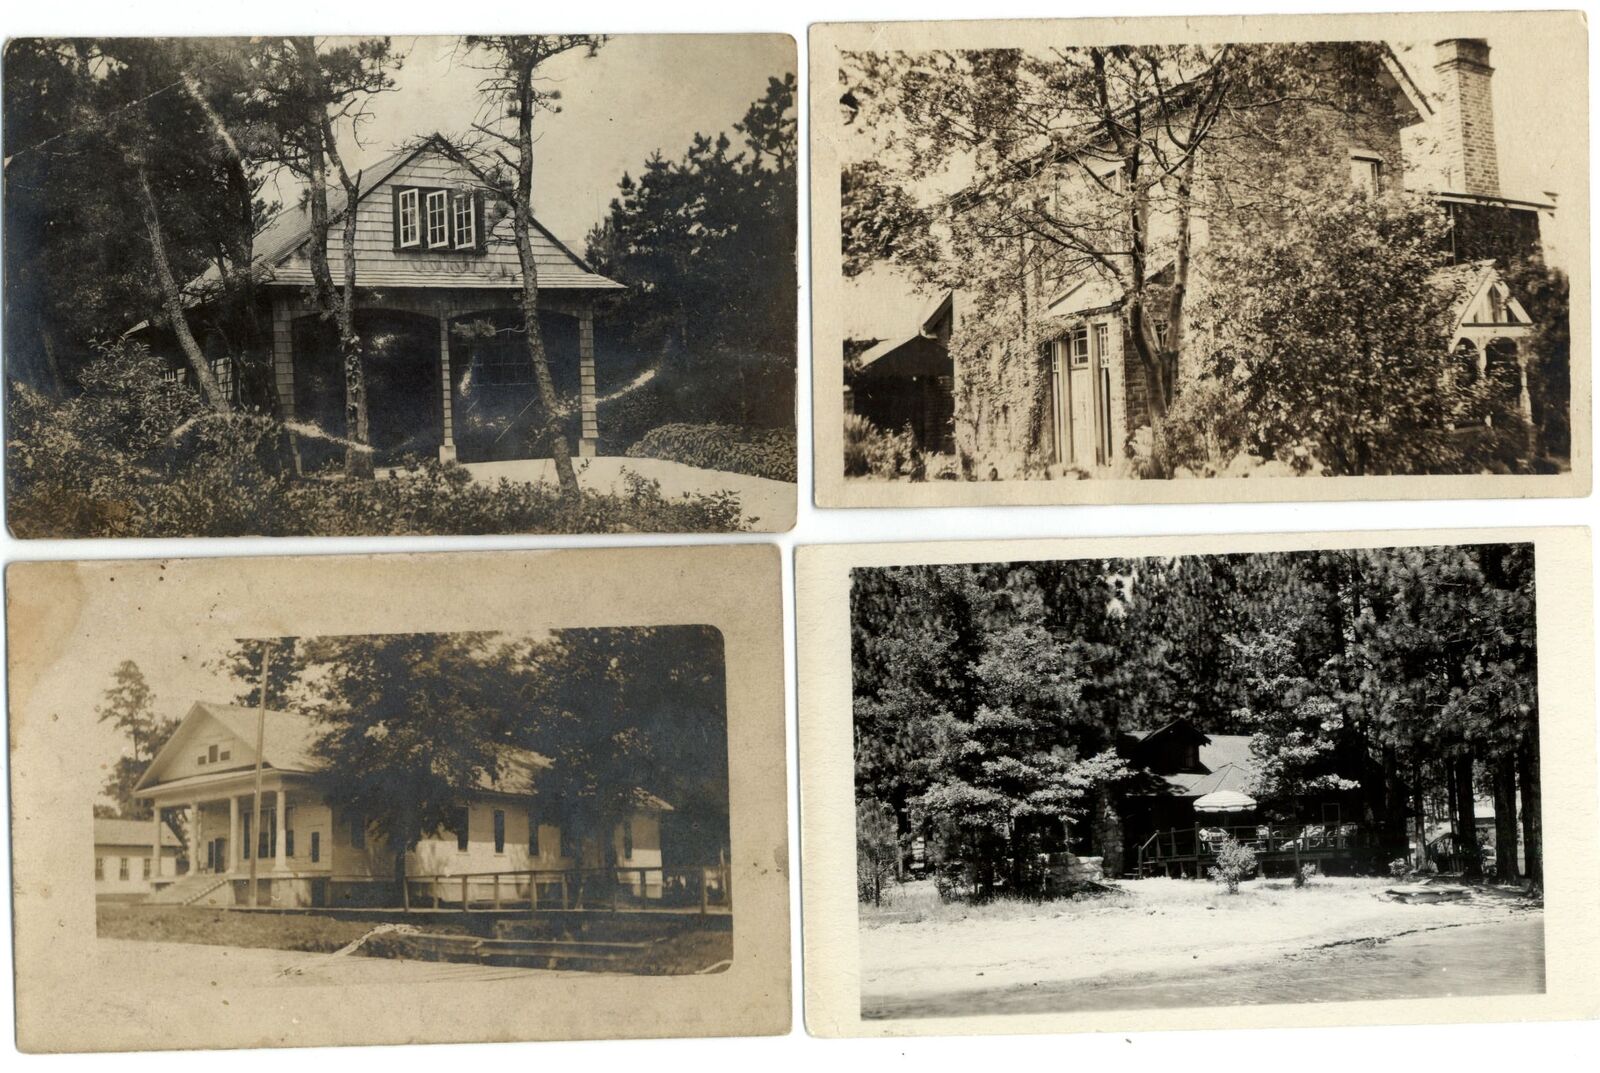 LOT OF 4 ~ RPPC Home architecture styles from 1930-1940s ~ real photo postcard